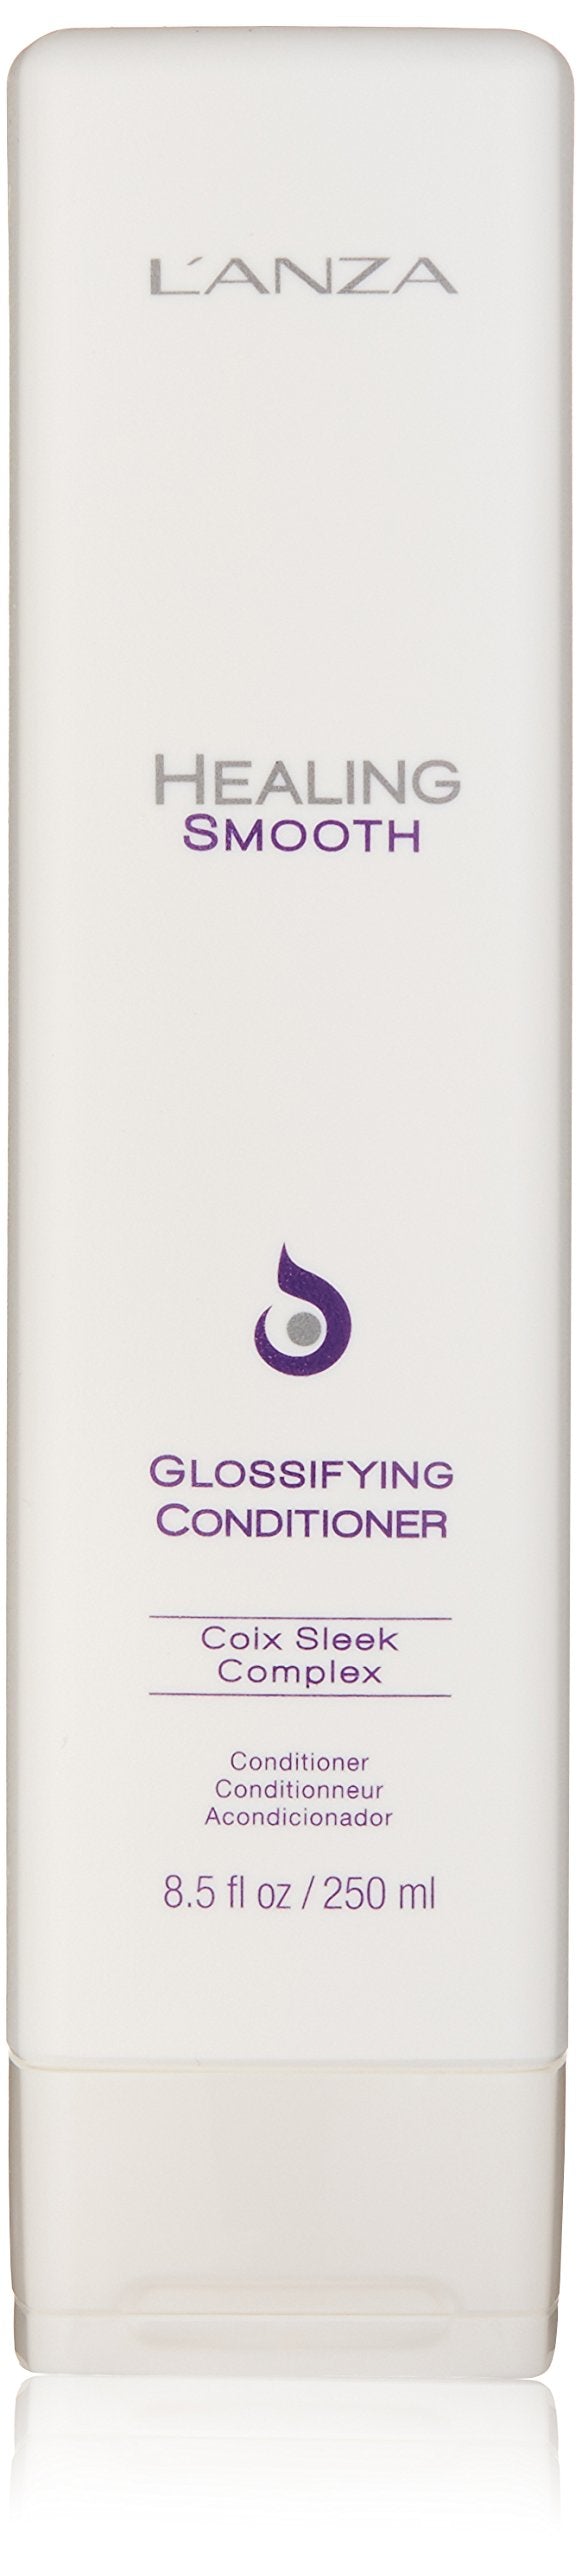 [Australia] - L'ANZA Healing Smooth Glossifying Conditioner, 250 ml 